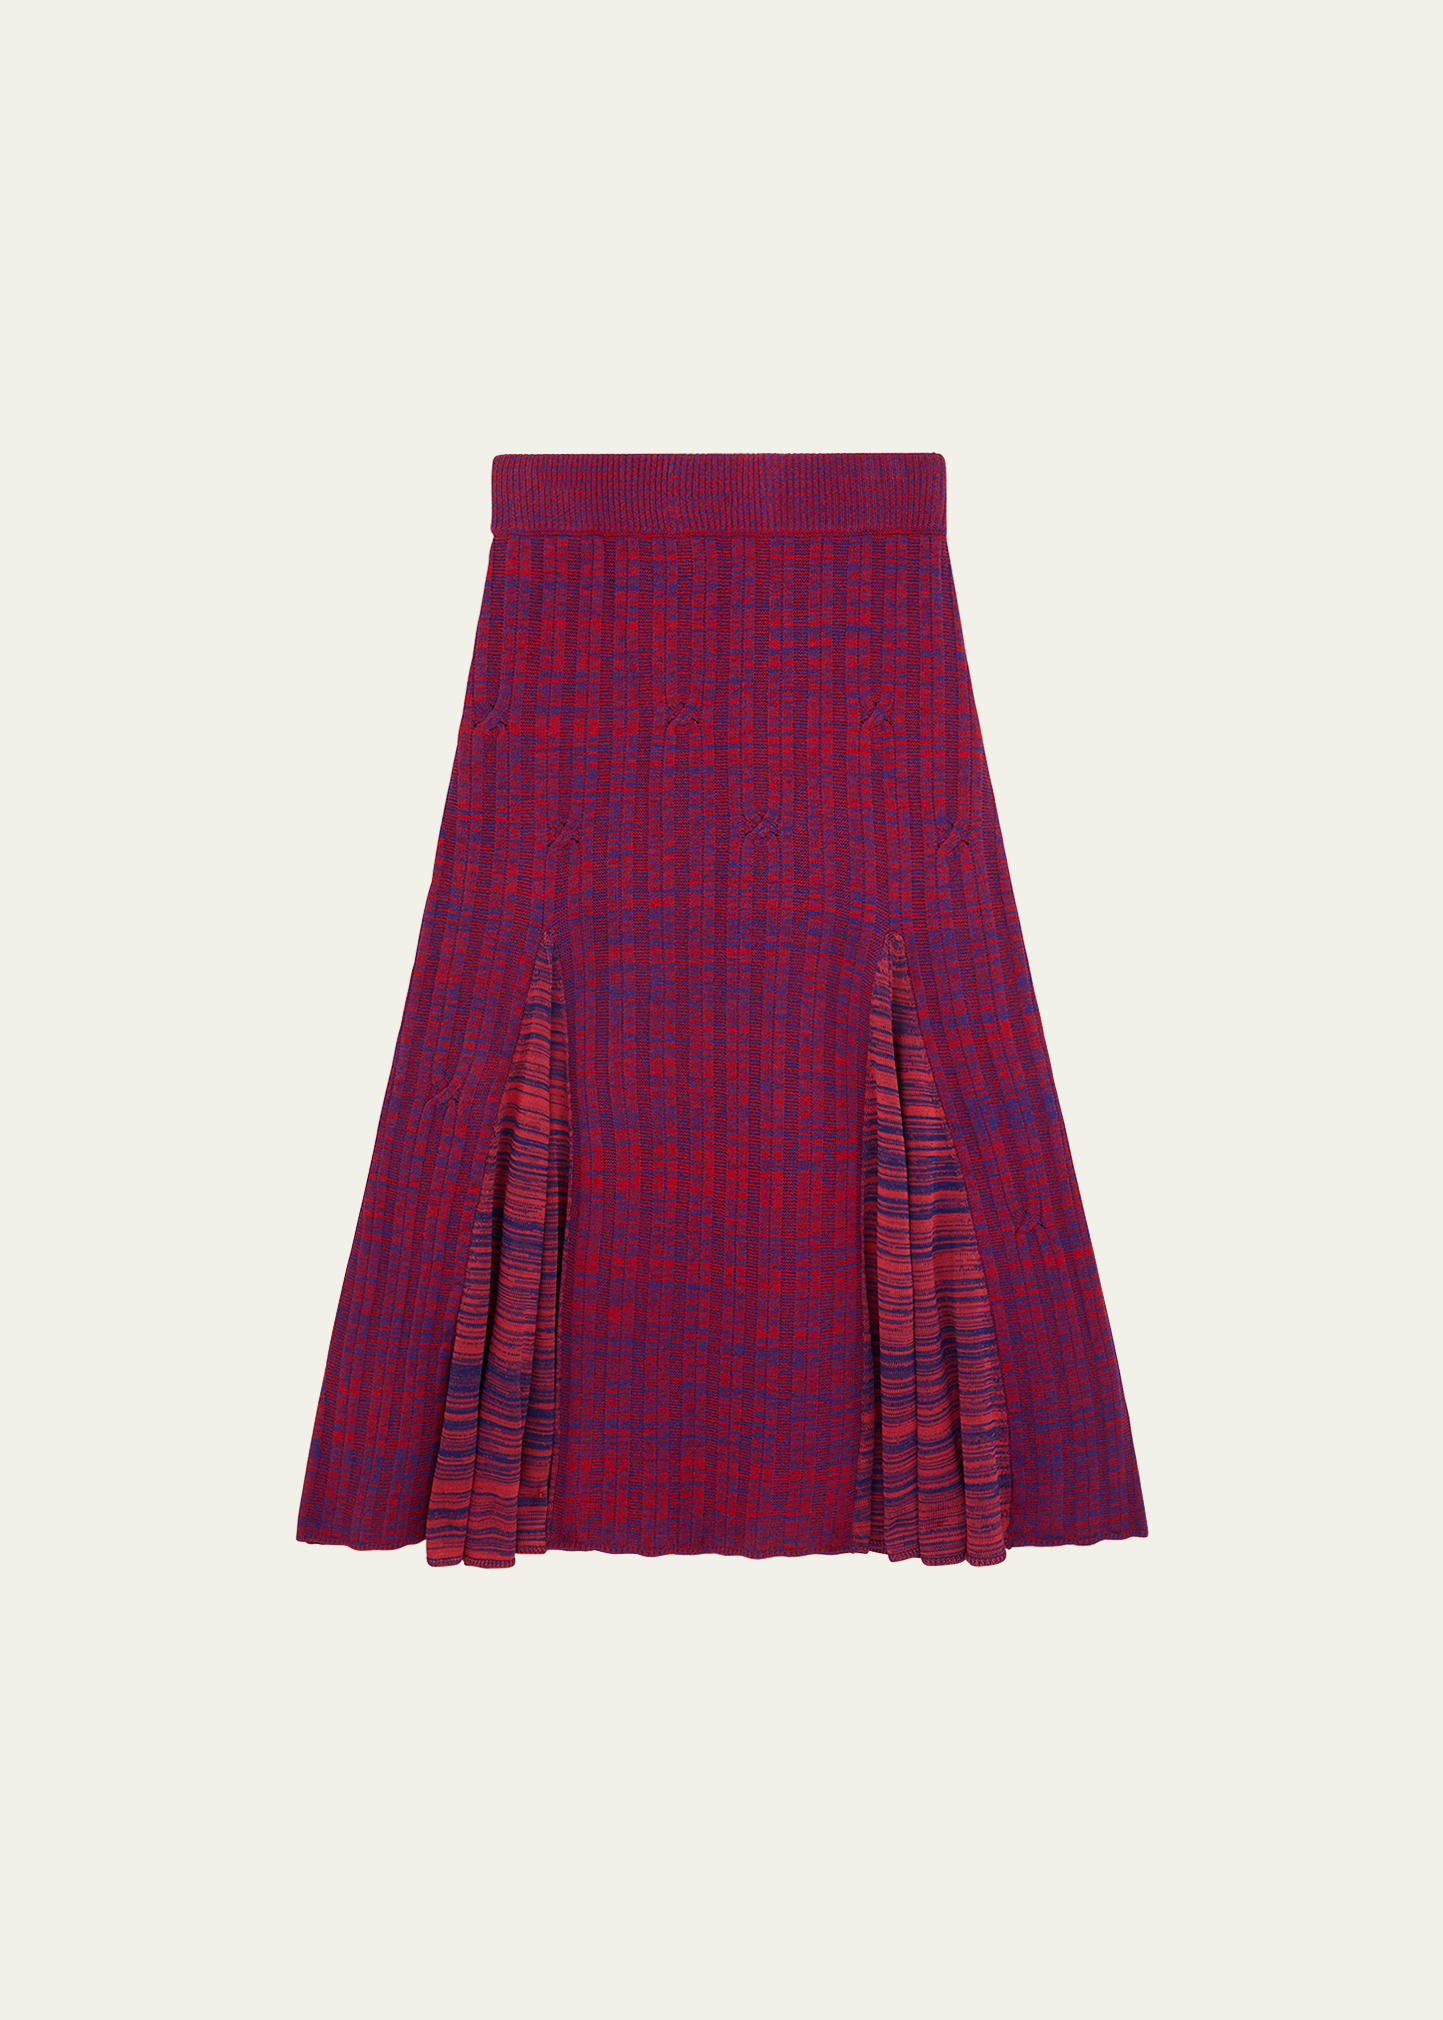 Wales Bonner Nile Godet Midi Skirt In Navy Red And Purp